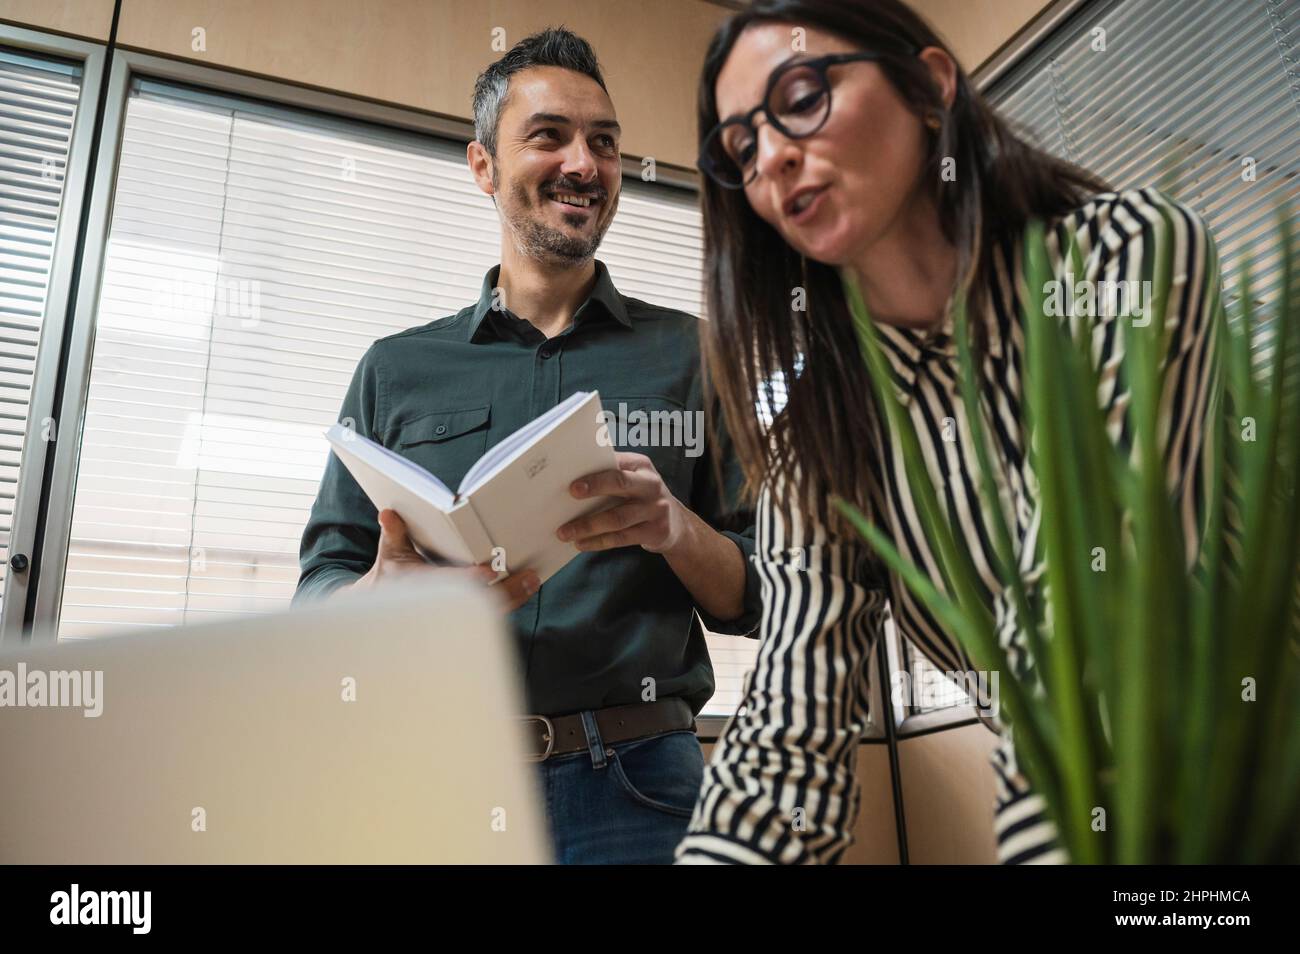 Middle age man and woman working on a project in an office. Stock Photo